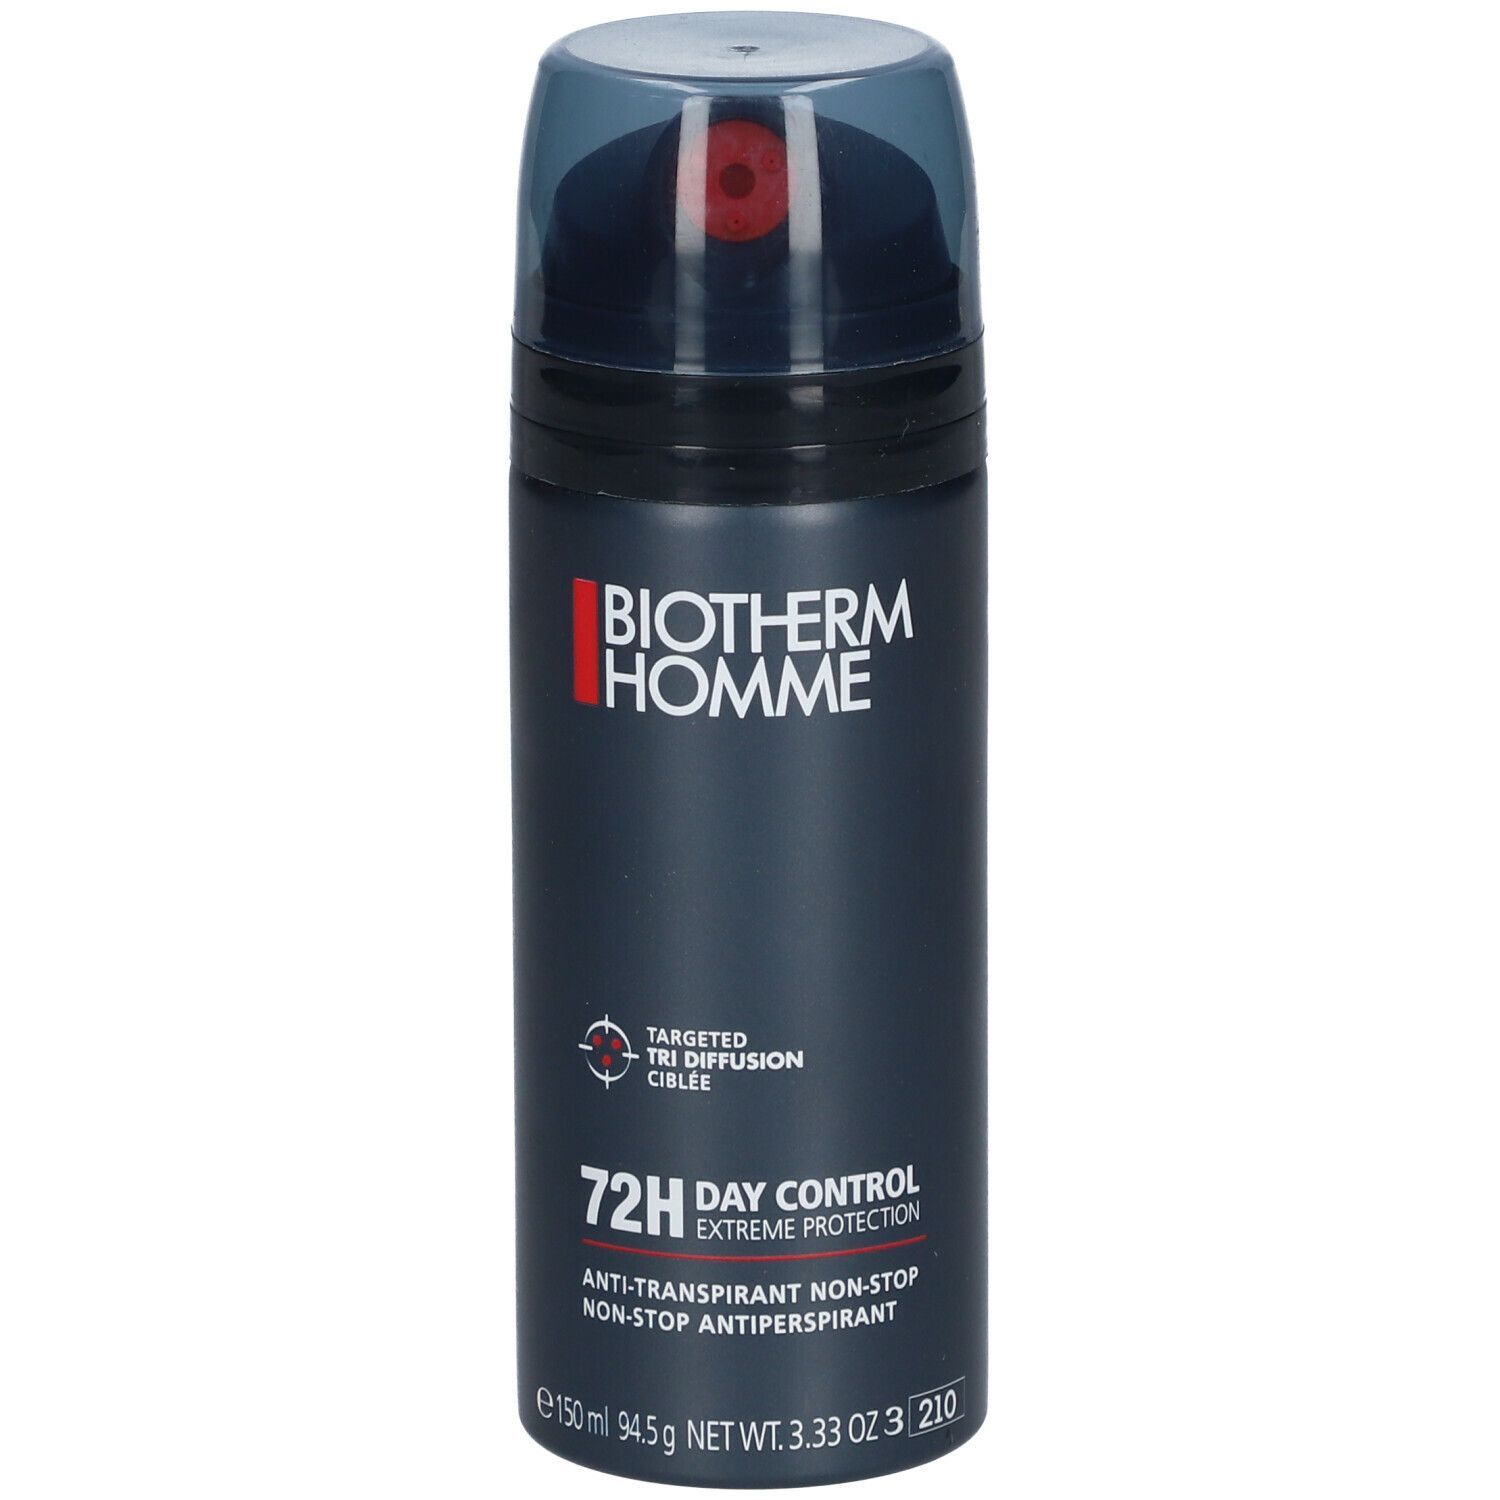 Biotherm Homme 72H Day Control - Protection Extrème